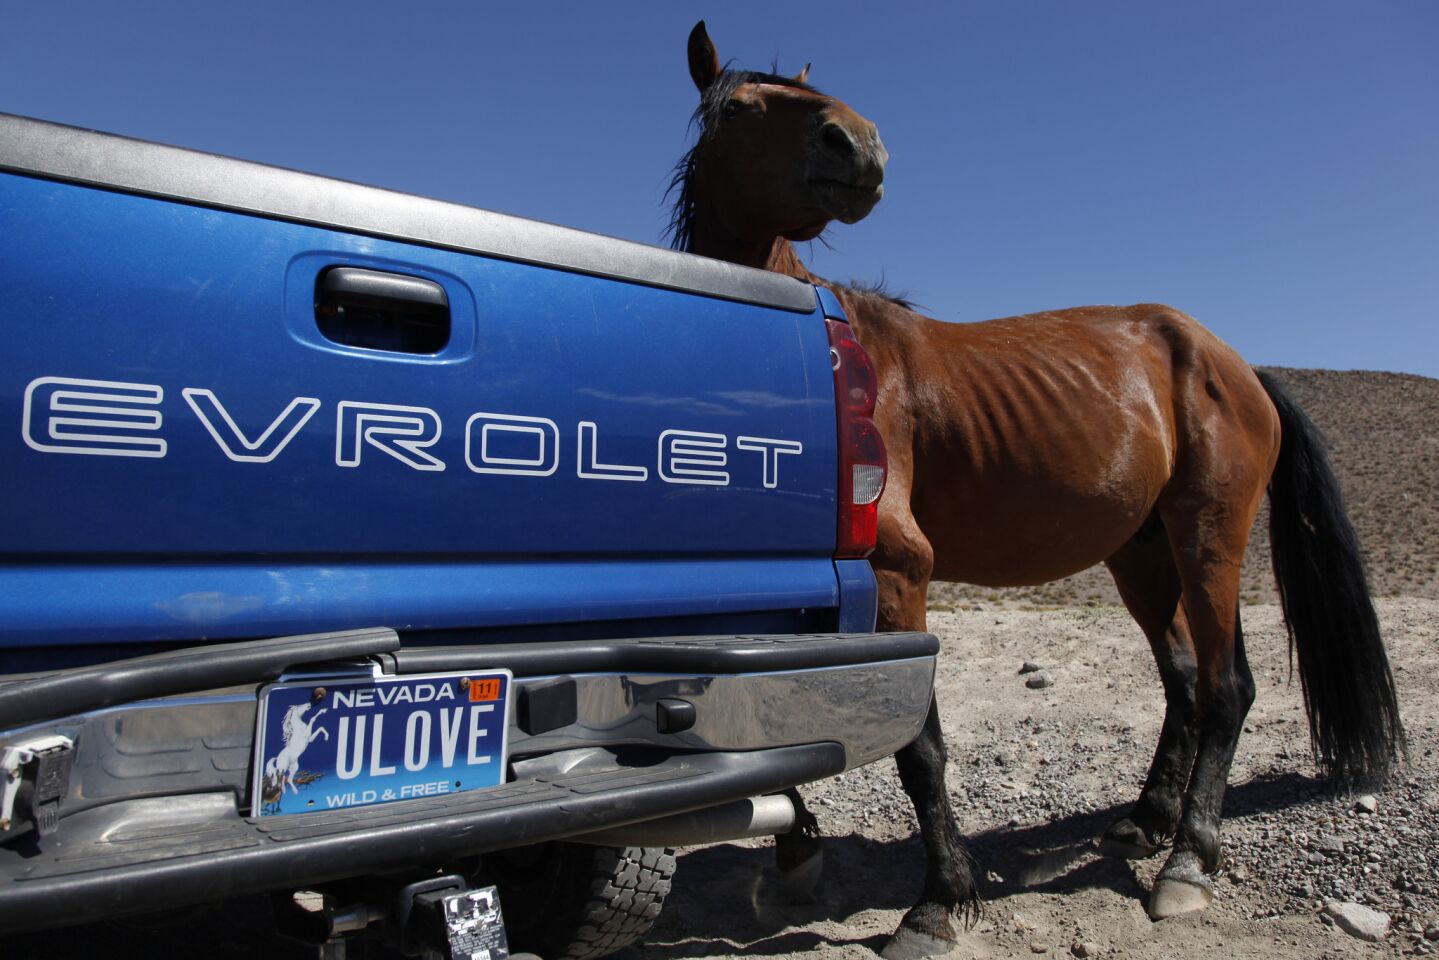 A wild horse accustomed to free handouts approaches the truck of Sally Summers, a wild horse advocate who helped create the specialty license plate used to raise awareness of the issue. She frowns on giving food to horses that are supposed to remain wild.